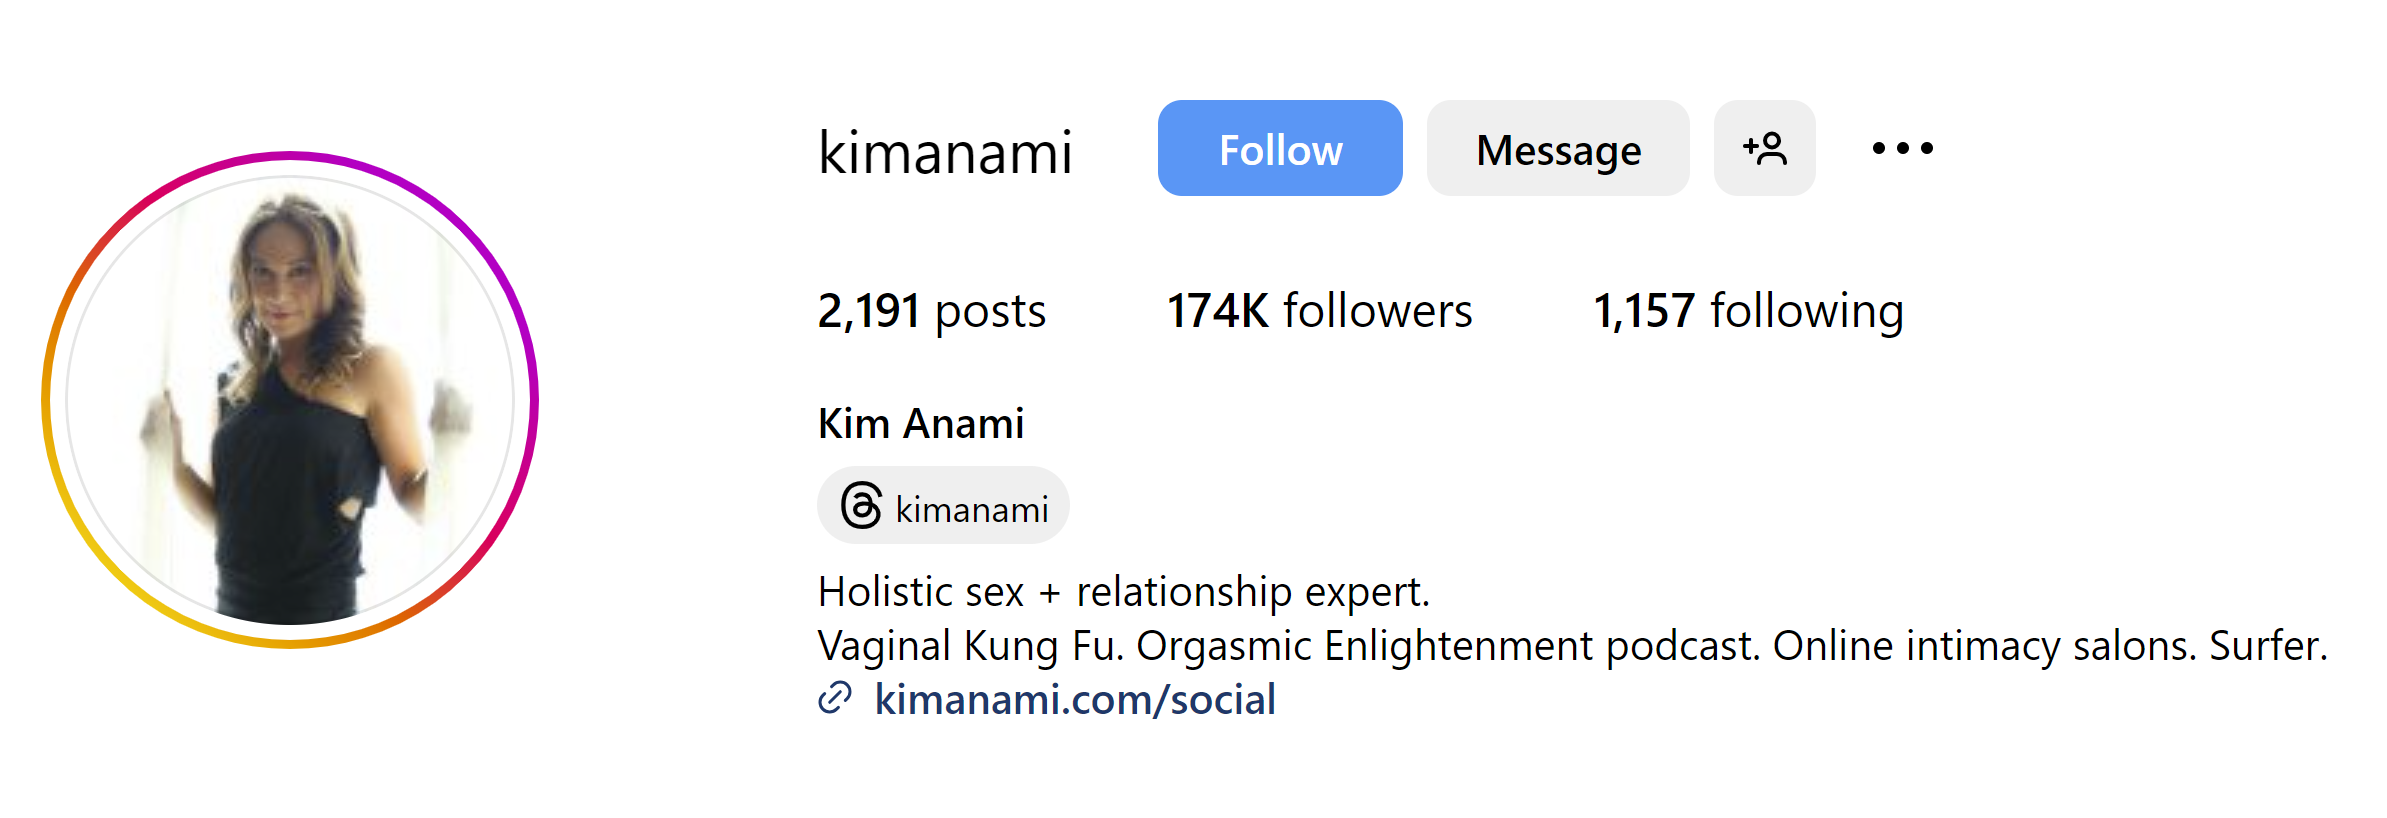 Who Is Kim Anami